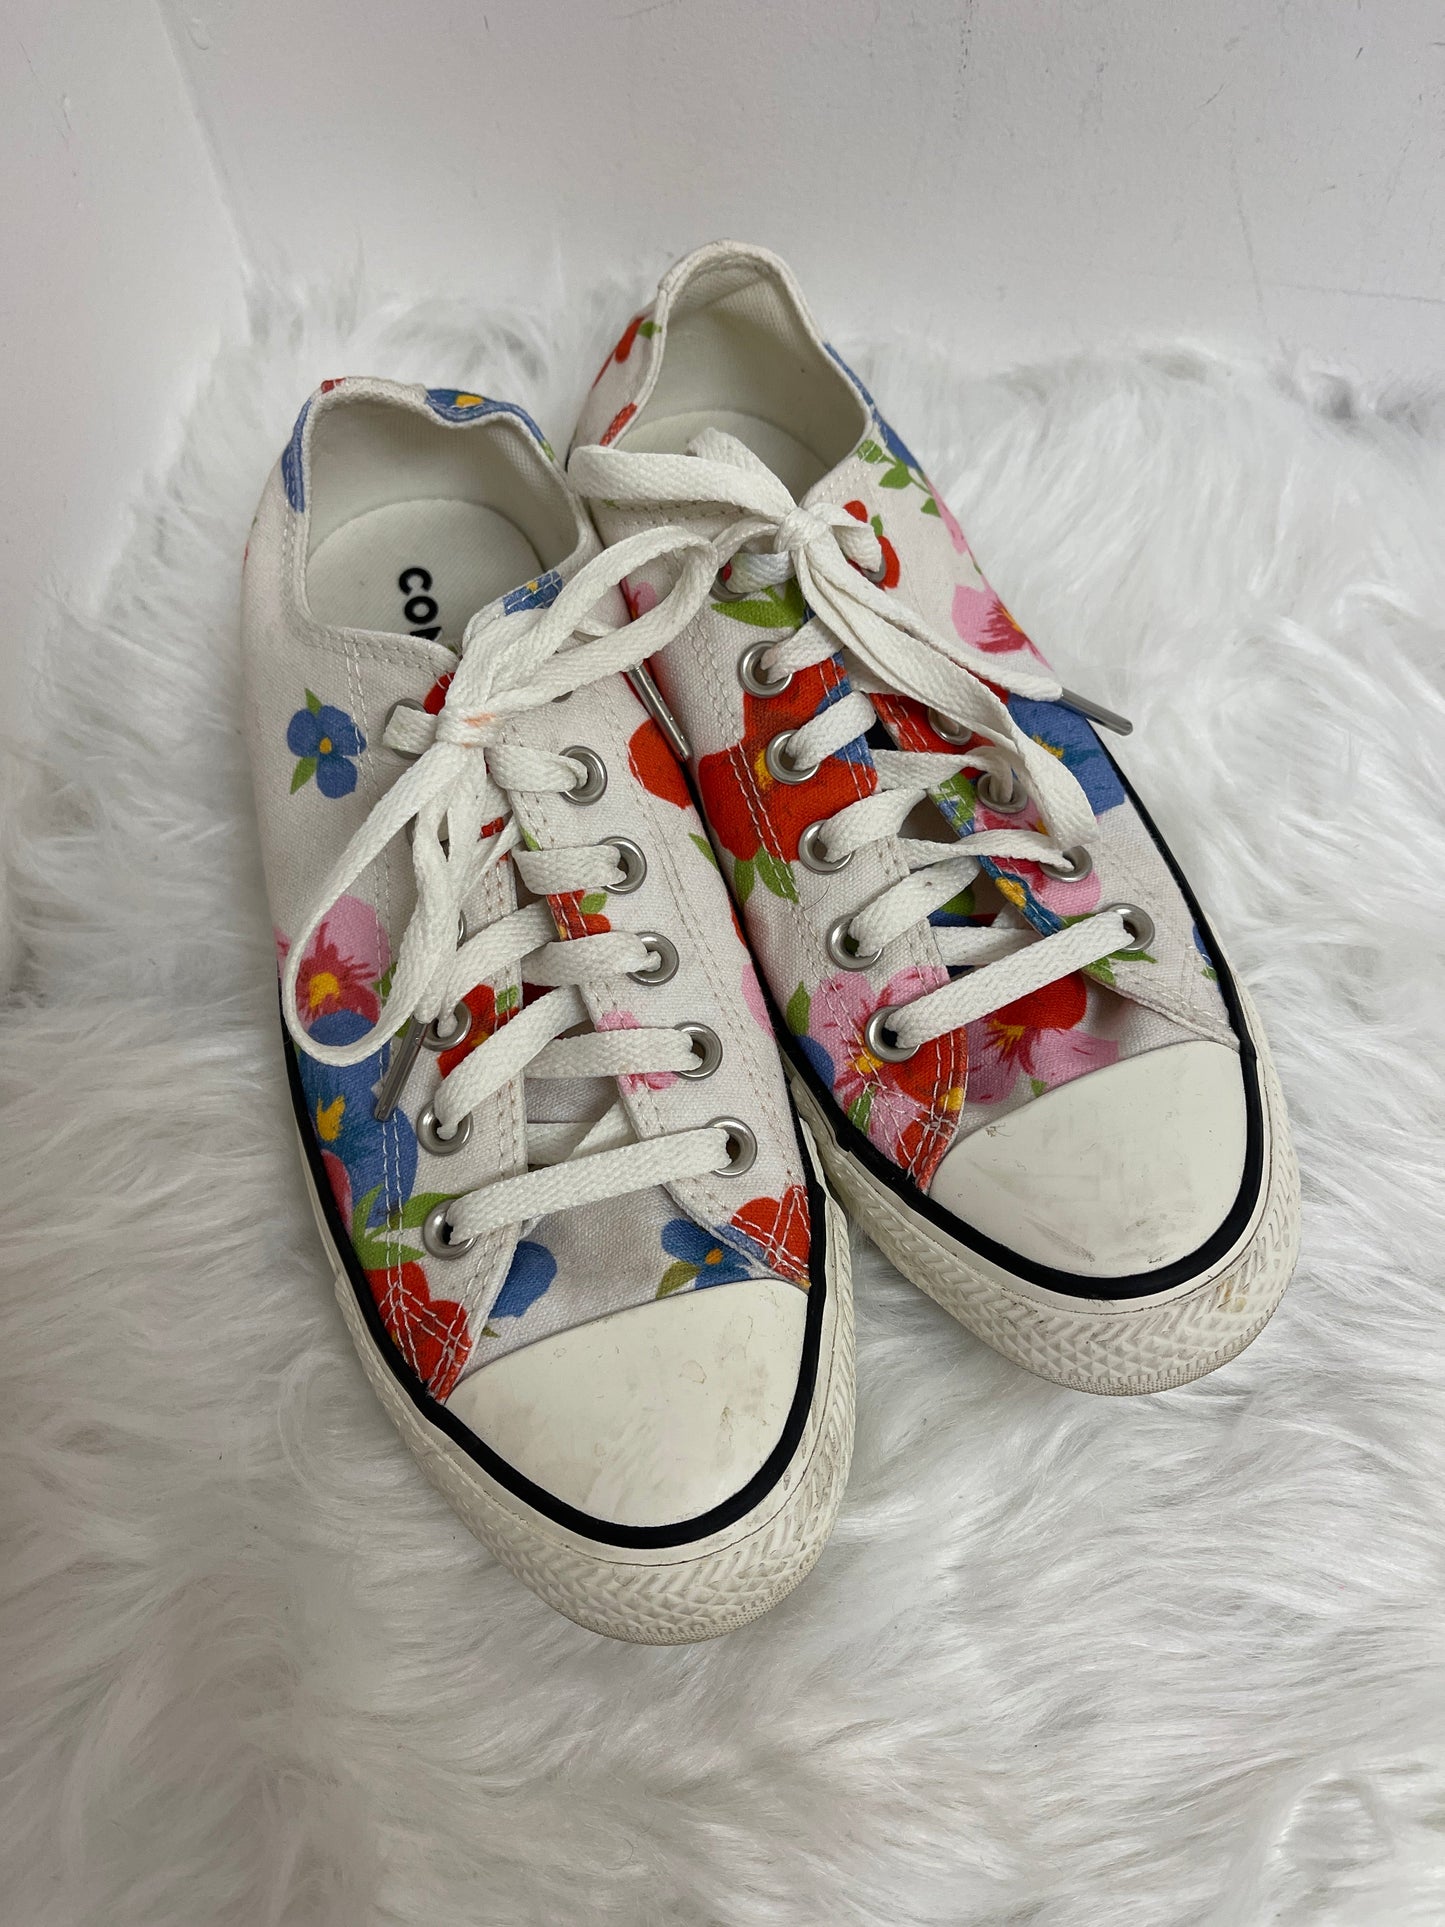 Floral Print Shoes Sneakers Converse, Size 8